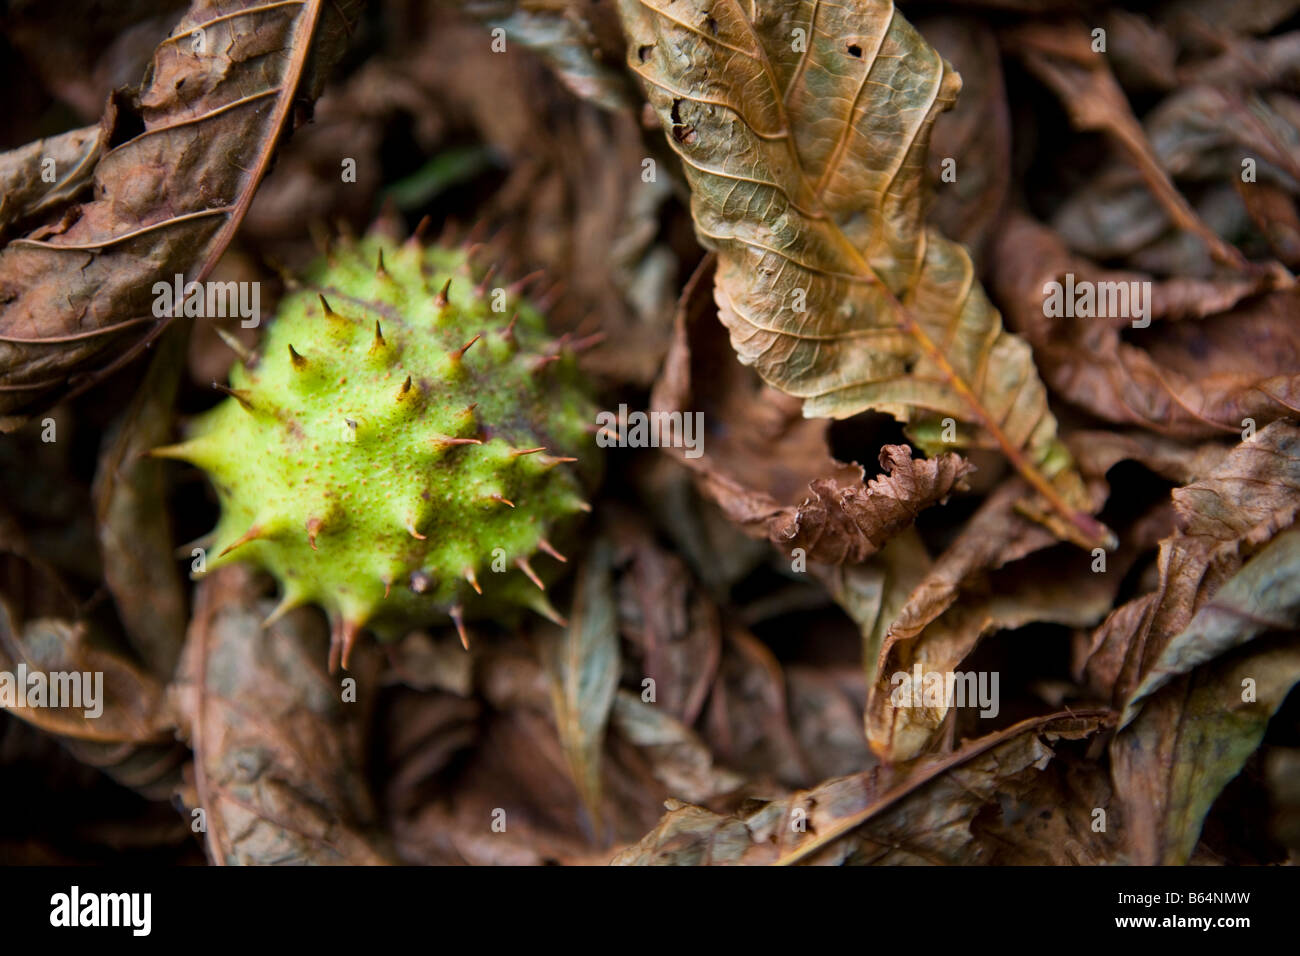 Fallen Horse Chestnut conker in a bed of autunm leaves Stock Photo